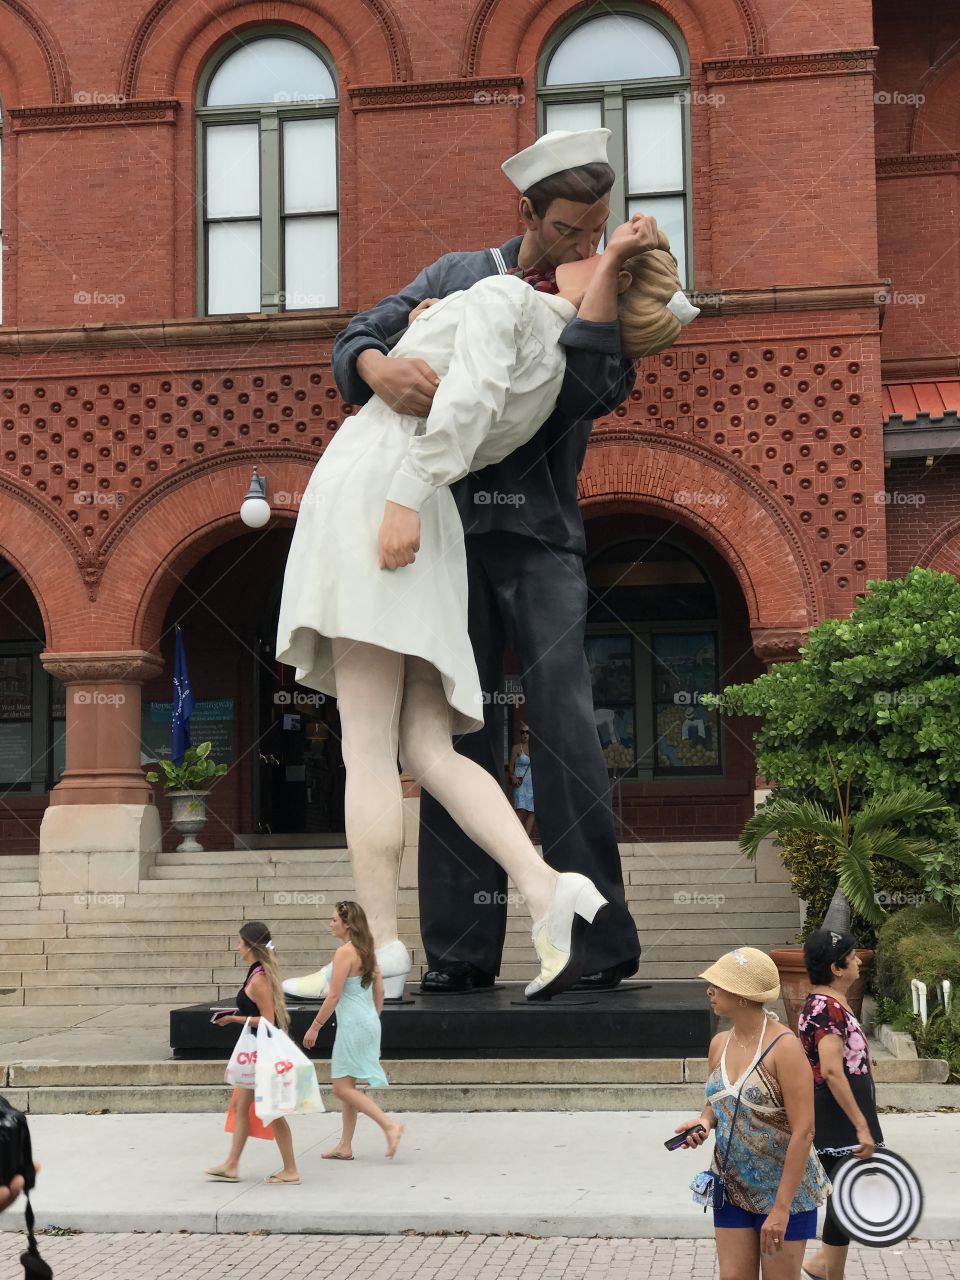 A statue of the famous photo of the sailor kissing the nurse which became a symbol of the end of World War II.  This statue is in the Key West Florida Historic Seaport. 